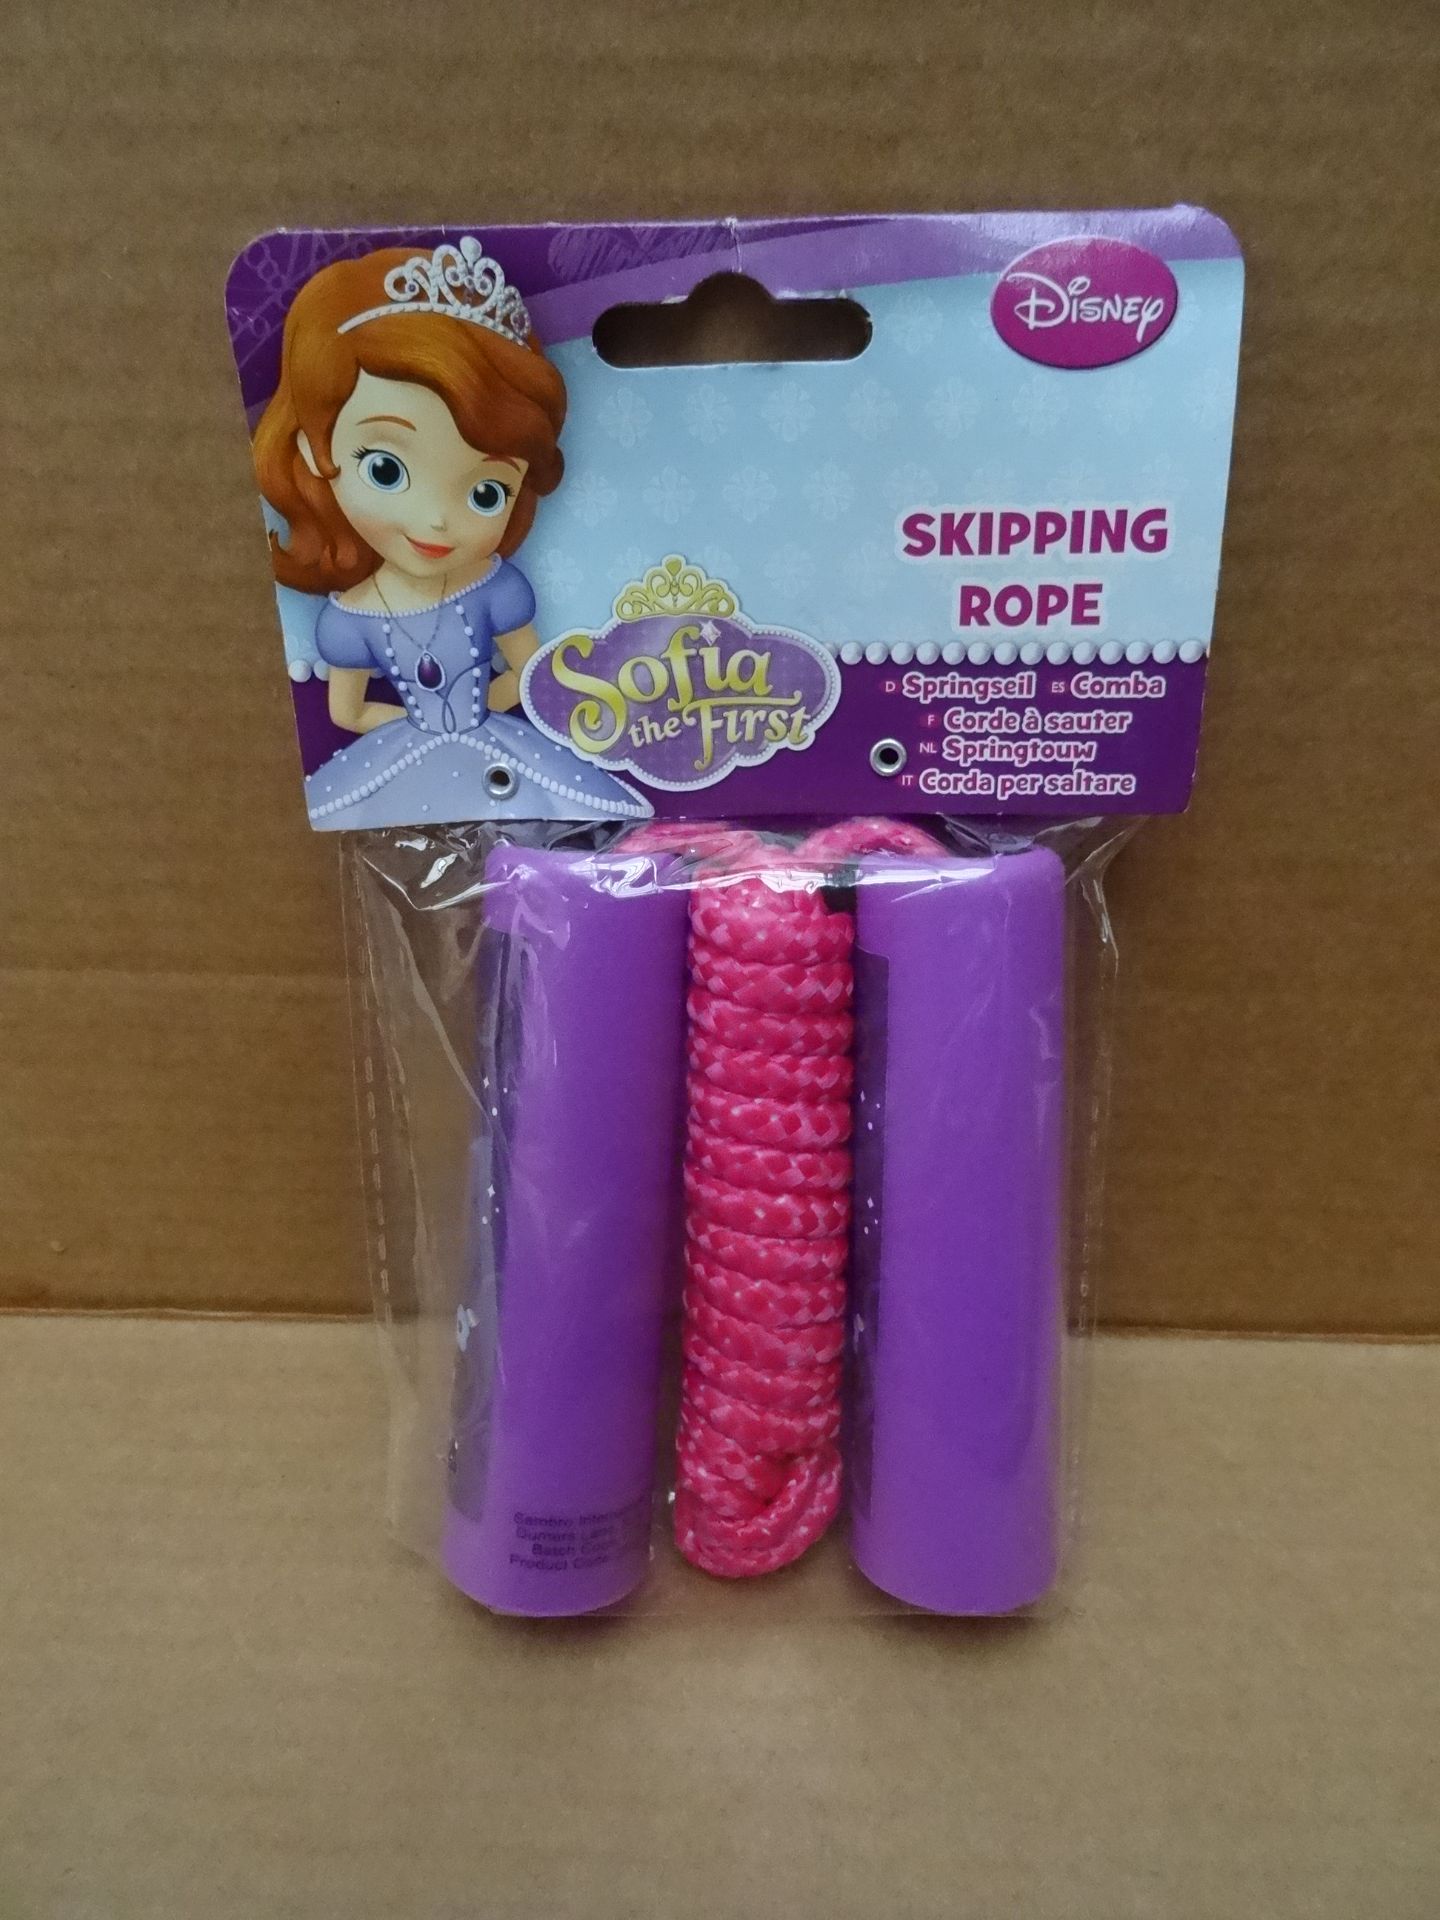 144 x Disney Sofia The First Skipping Rope. Brand new and Packaged. High Quality. Original RRP £4.99